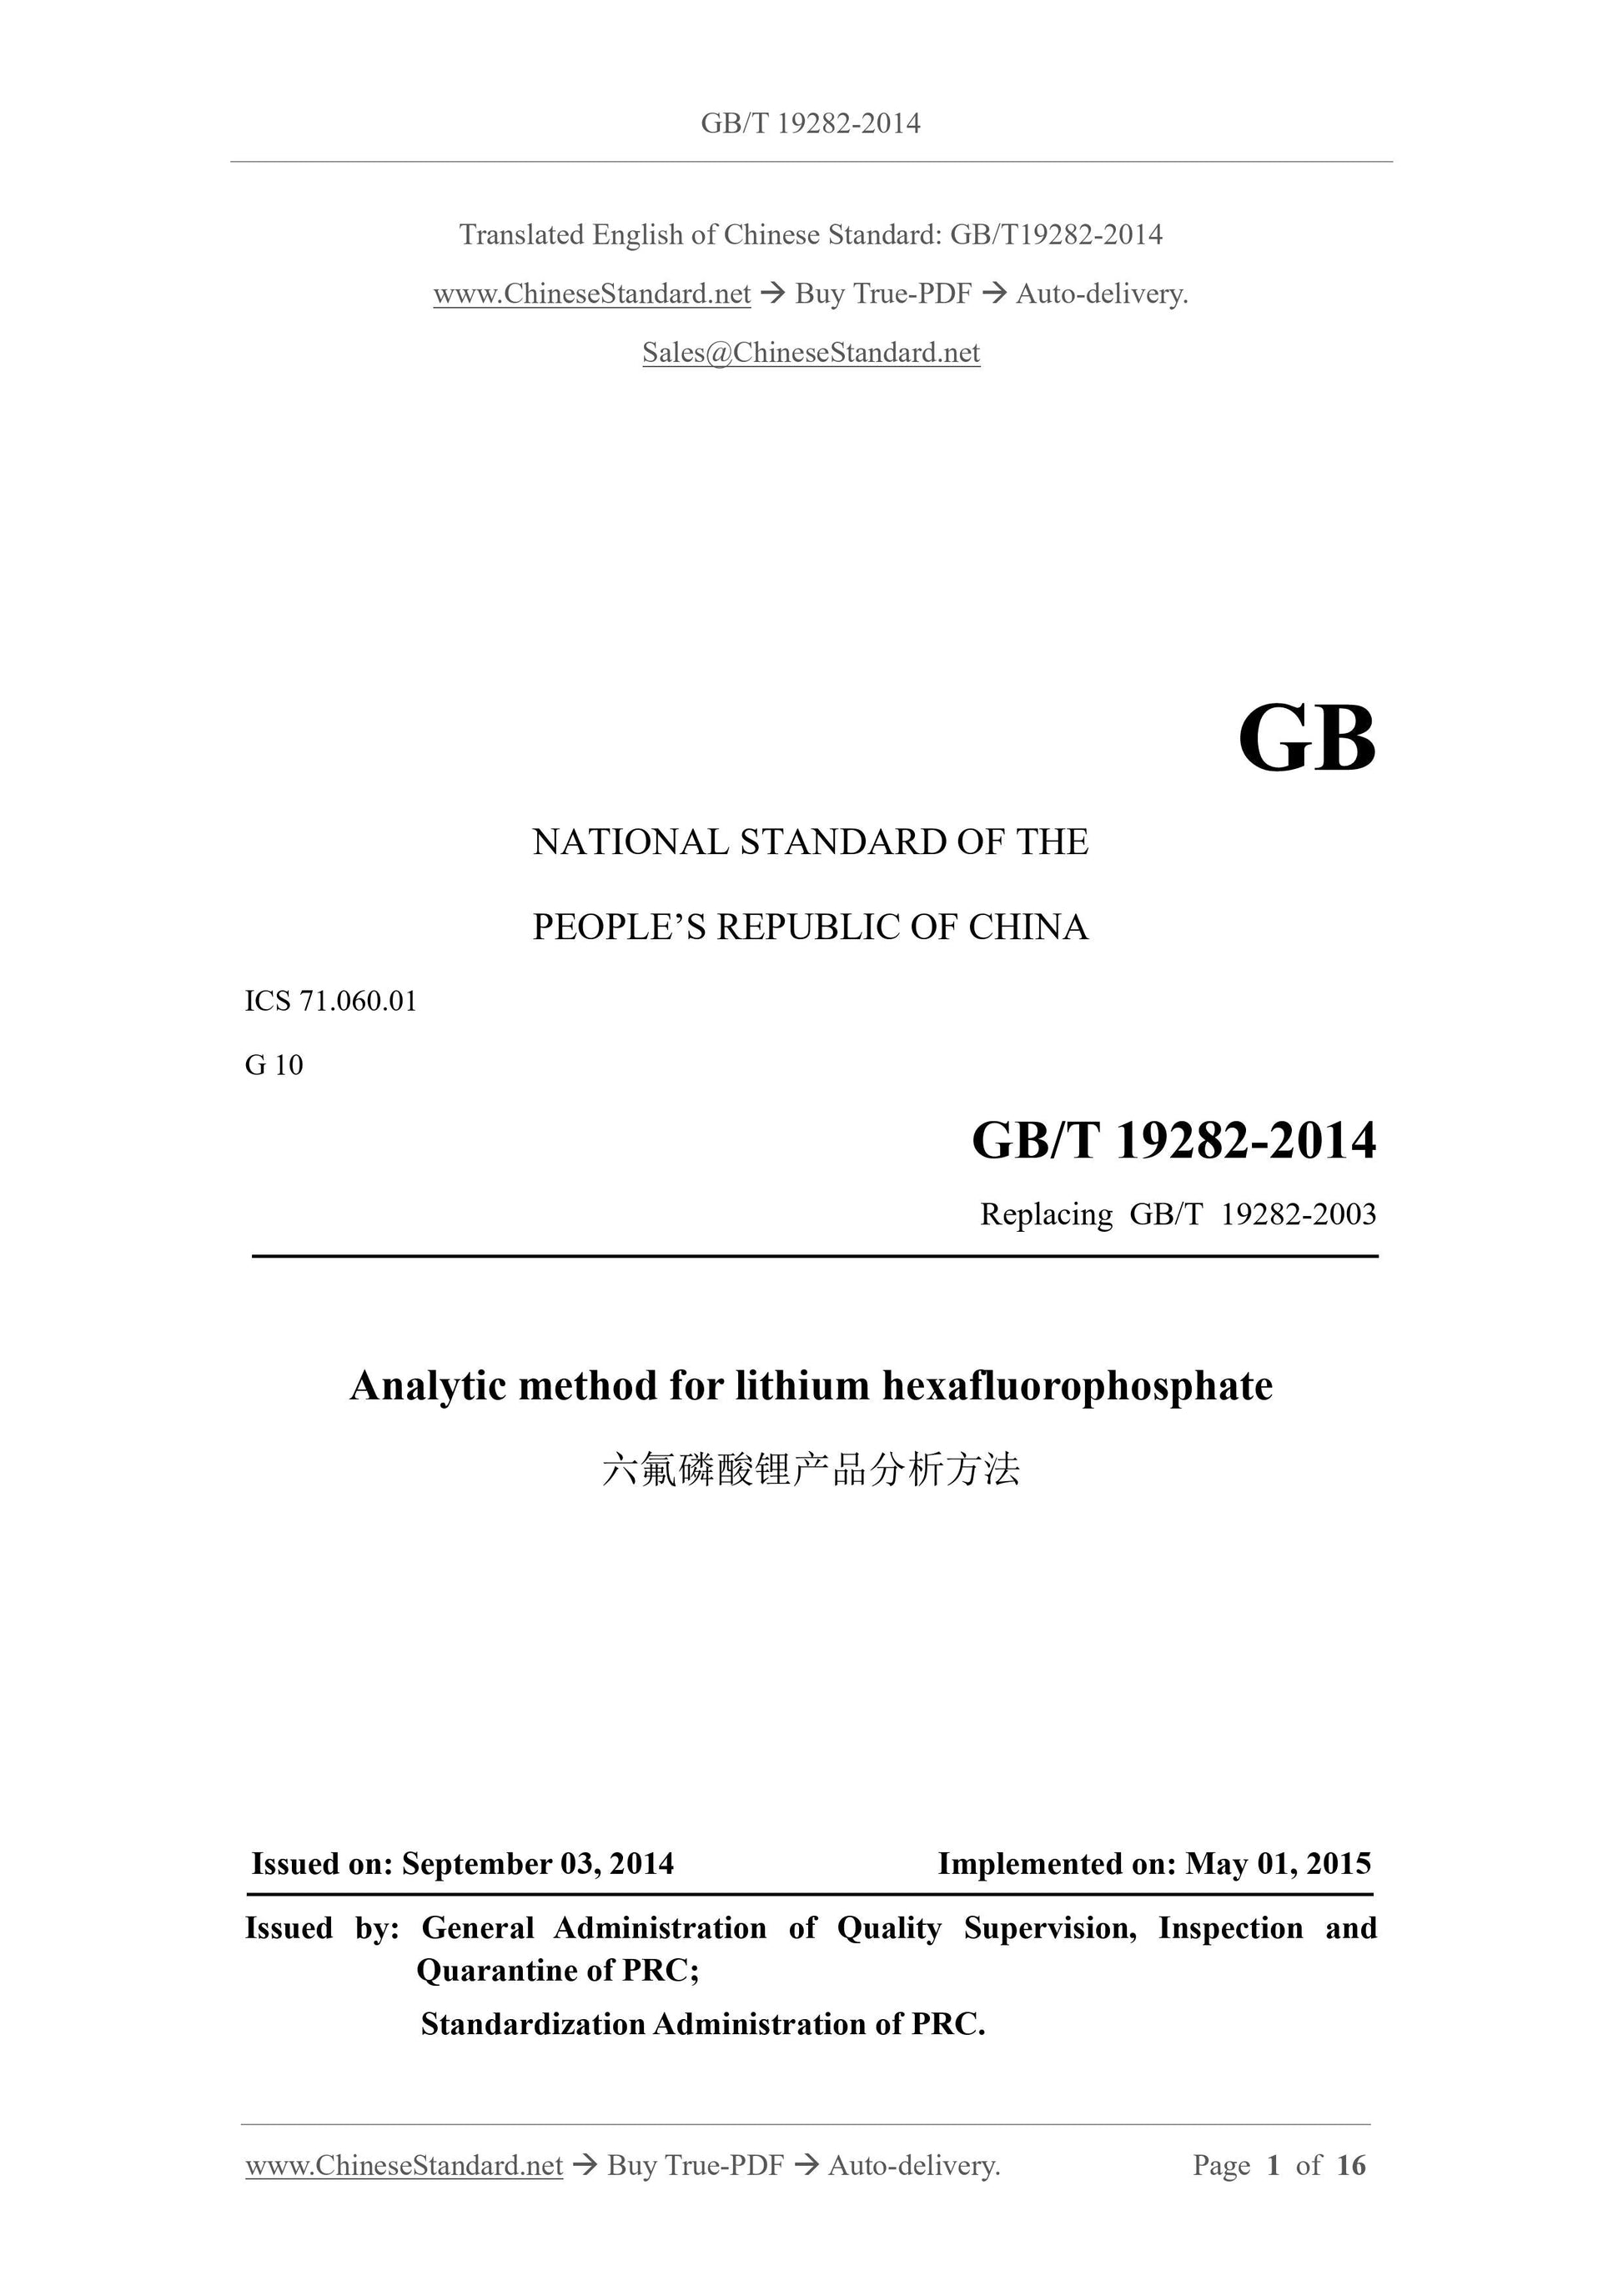 GB/T 19282-2014 Page 1